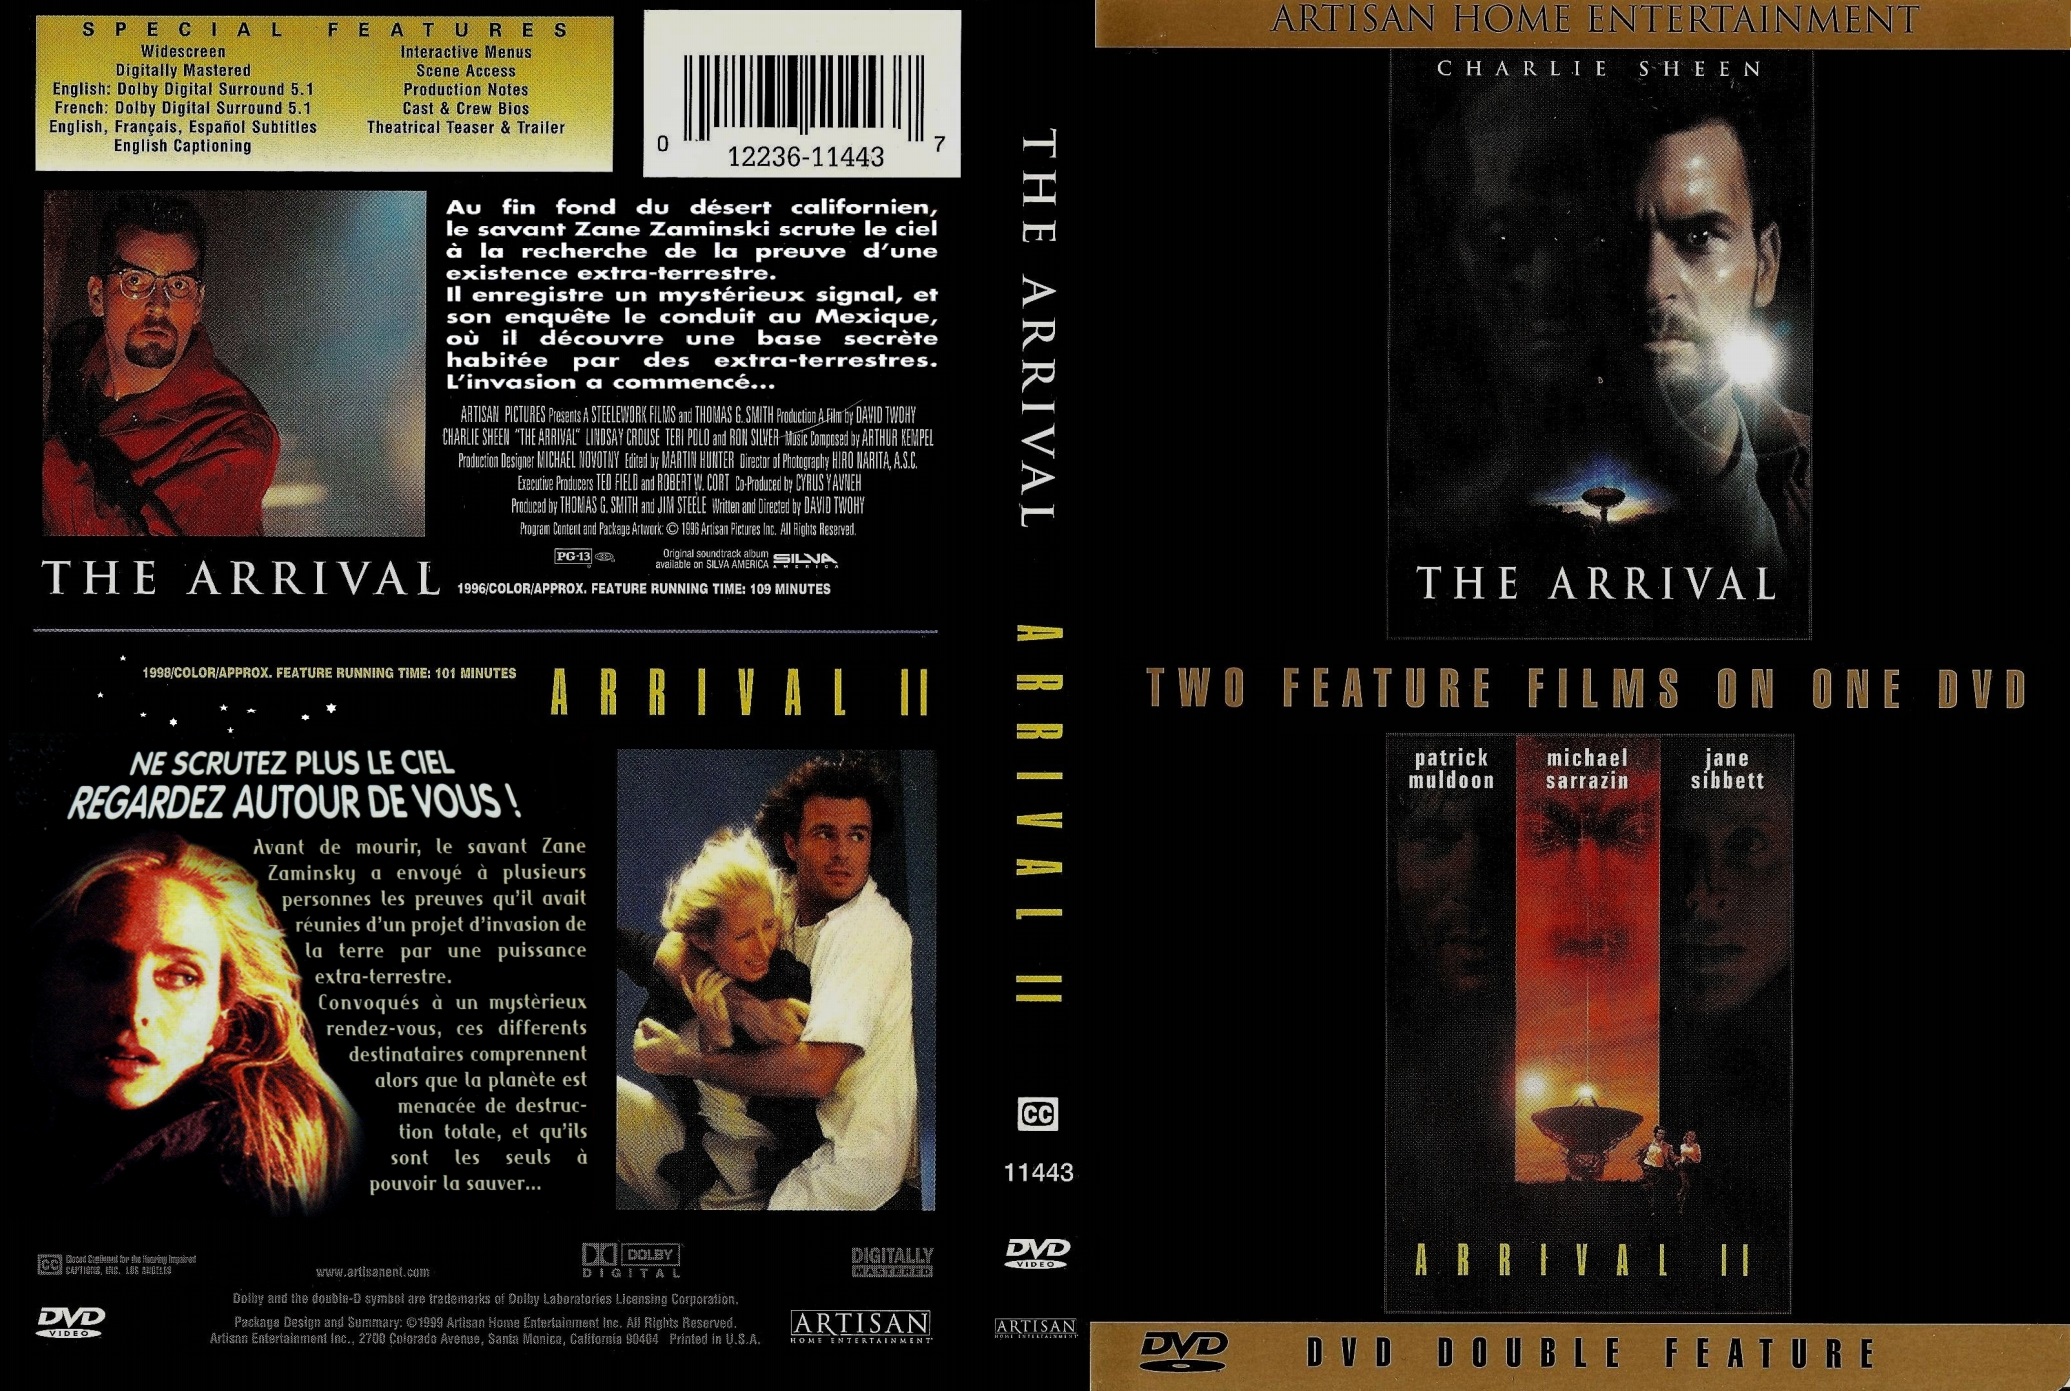 Jaquette DVD The Arrival 1 & 2 custom 